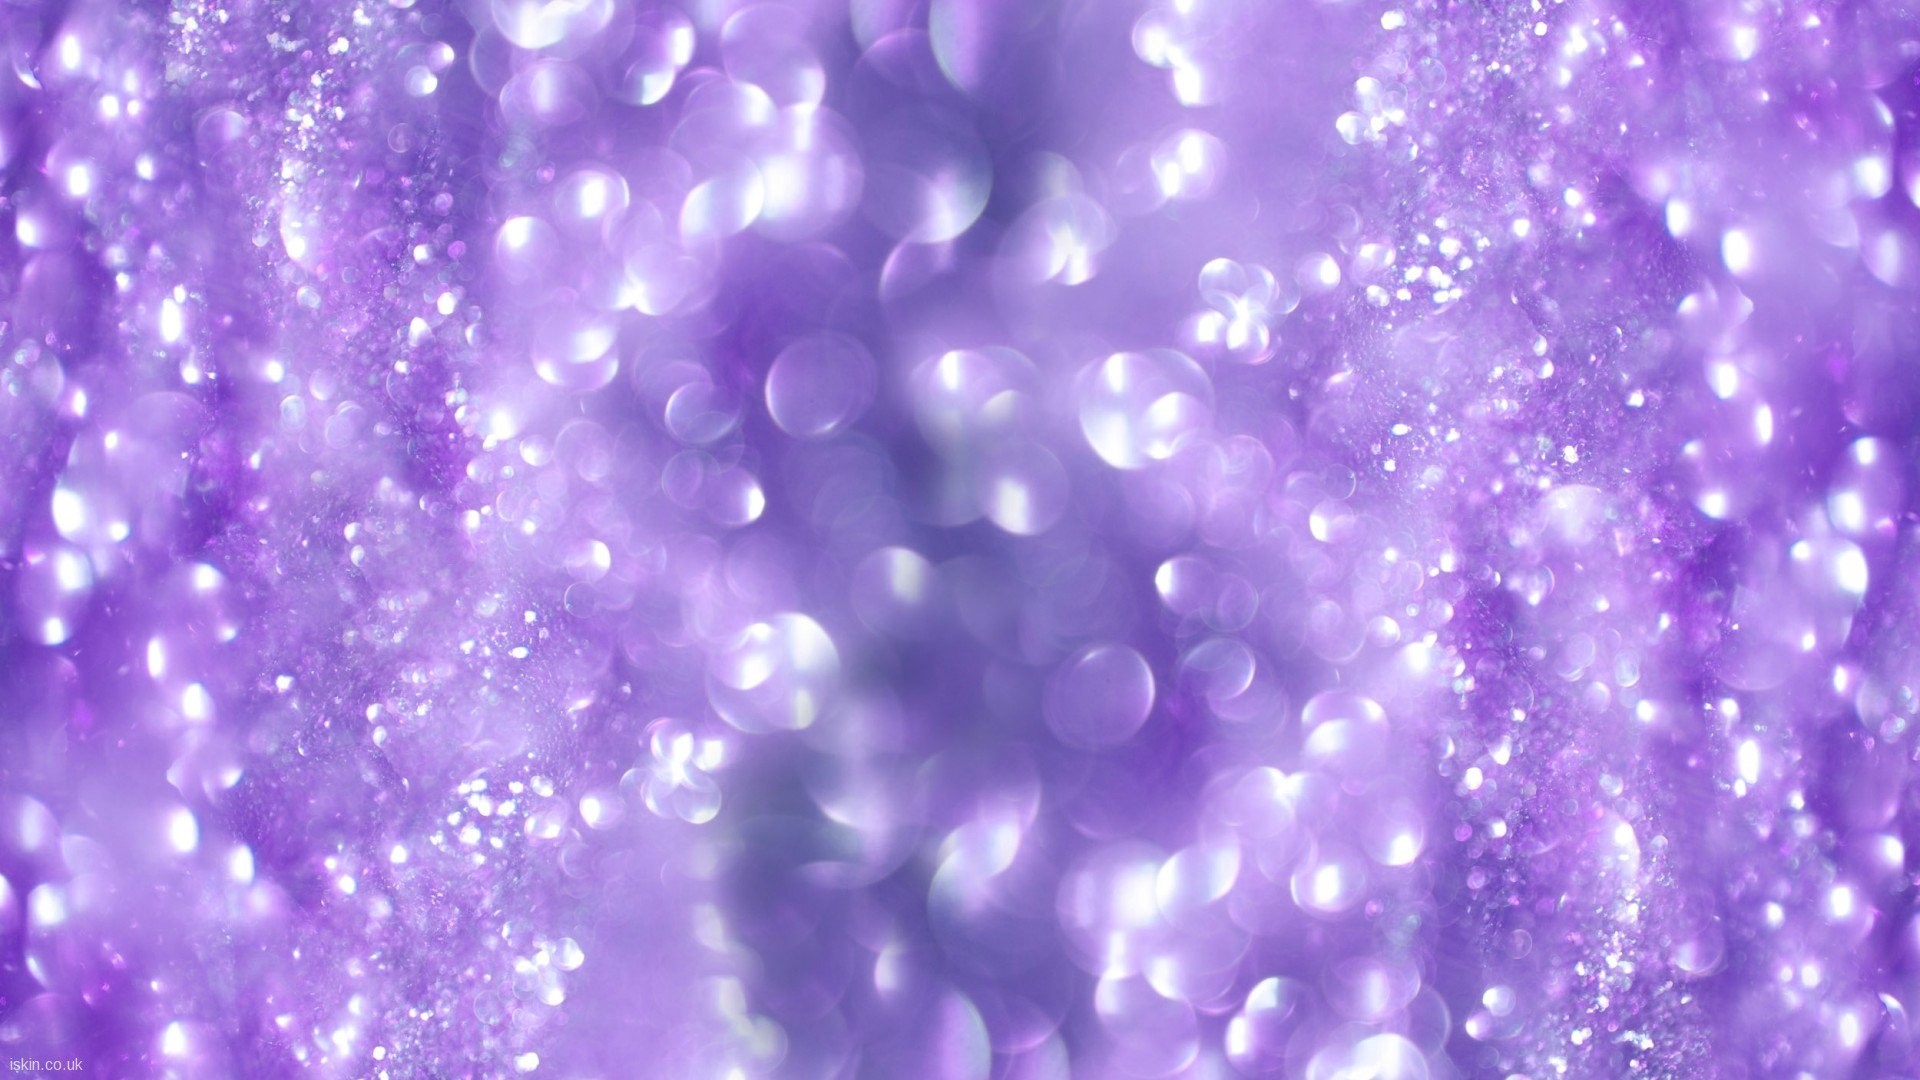 1920x1080 Colorful Sky Wallpaper Sparkly Purple Background